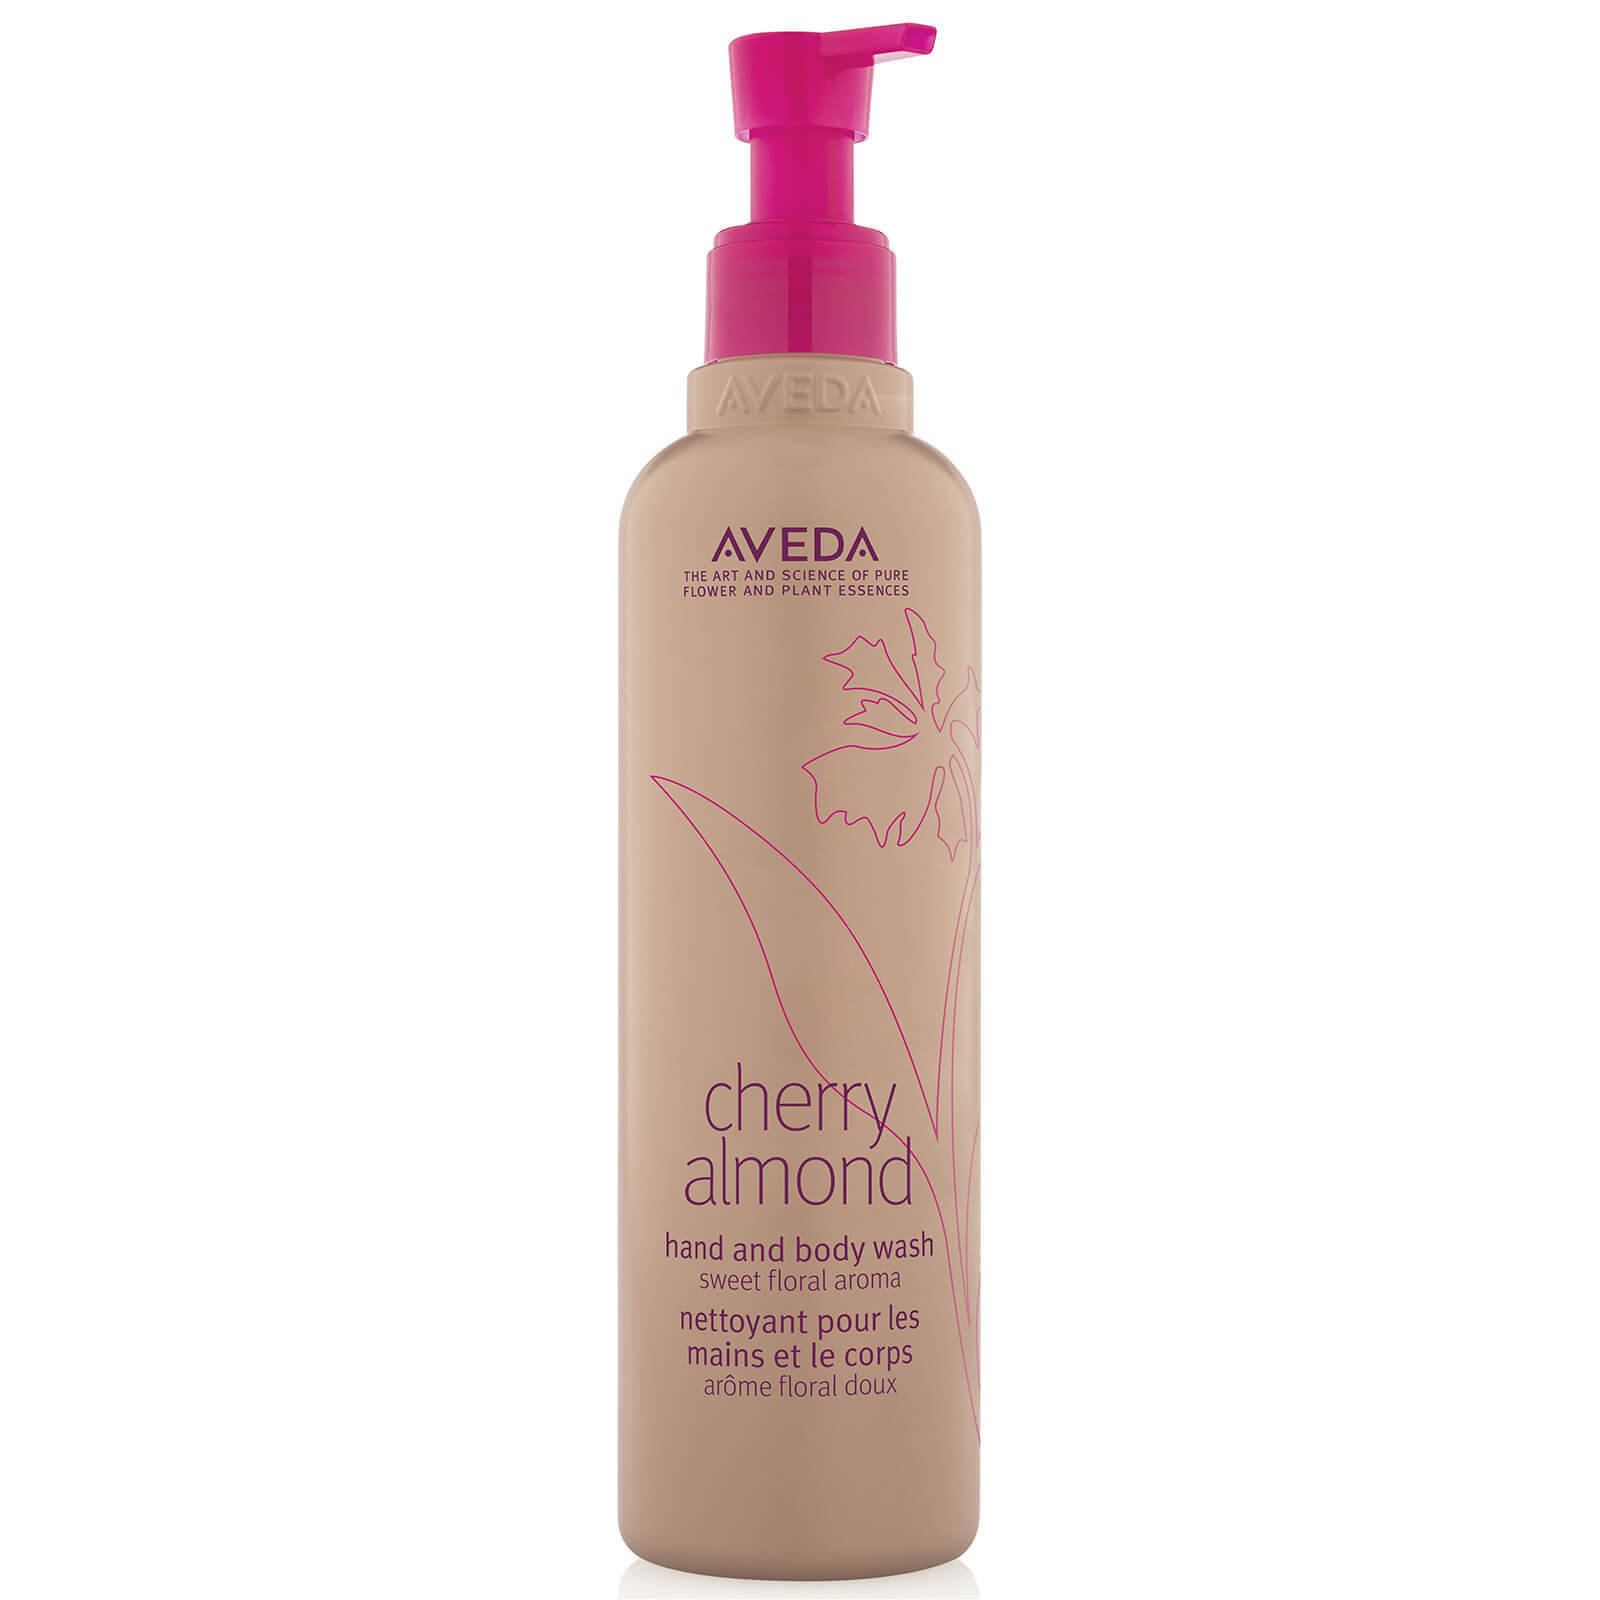 Photos - Facial / Body Cleansing Product Aveda Cherry Almond Hand & Body Wash AT2N010000 